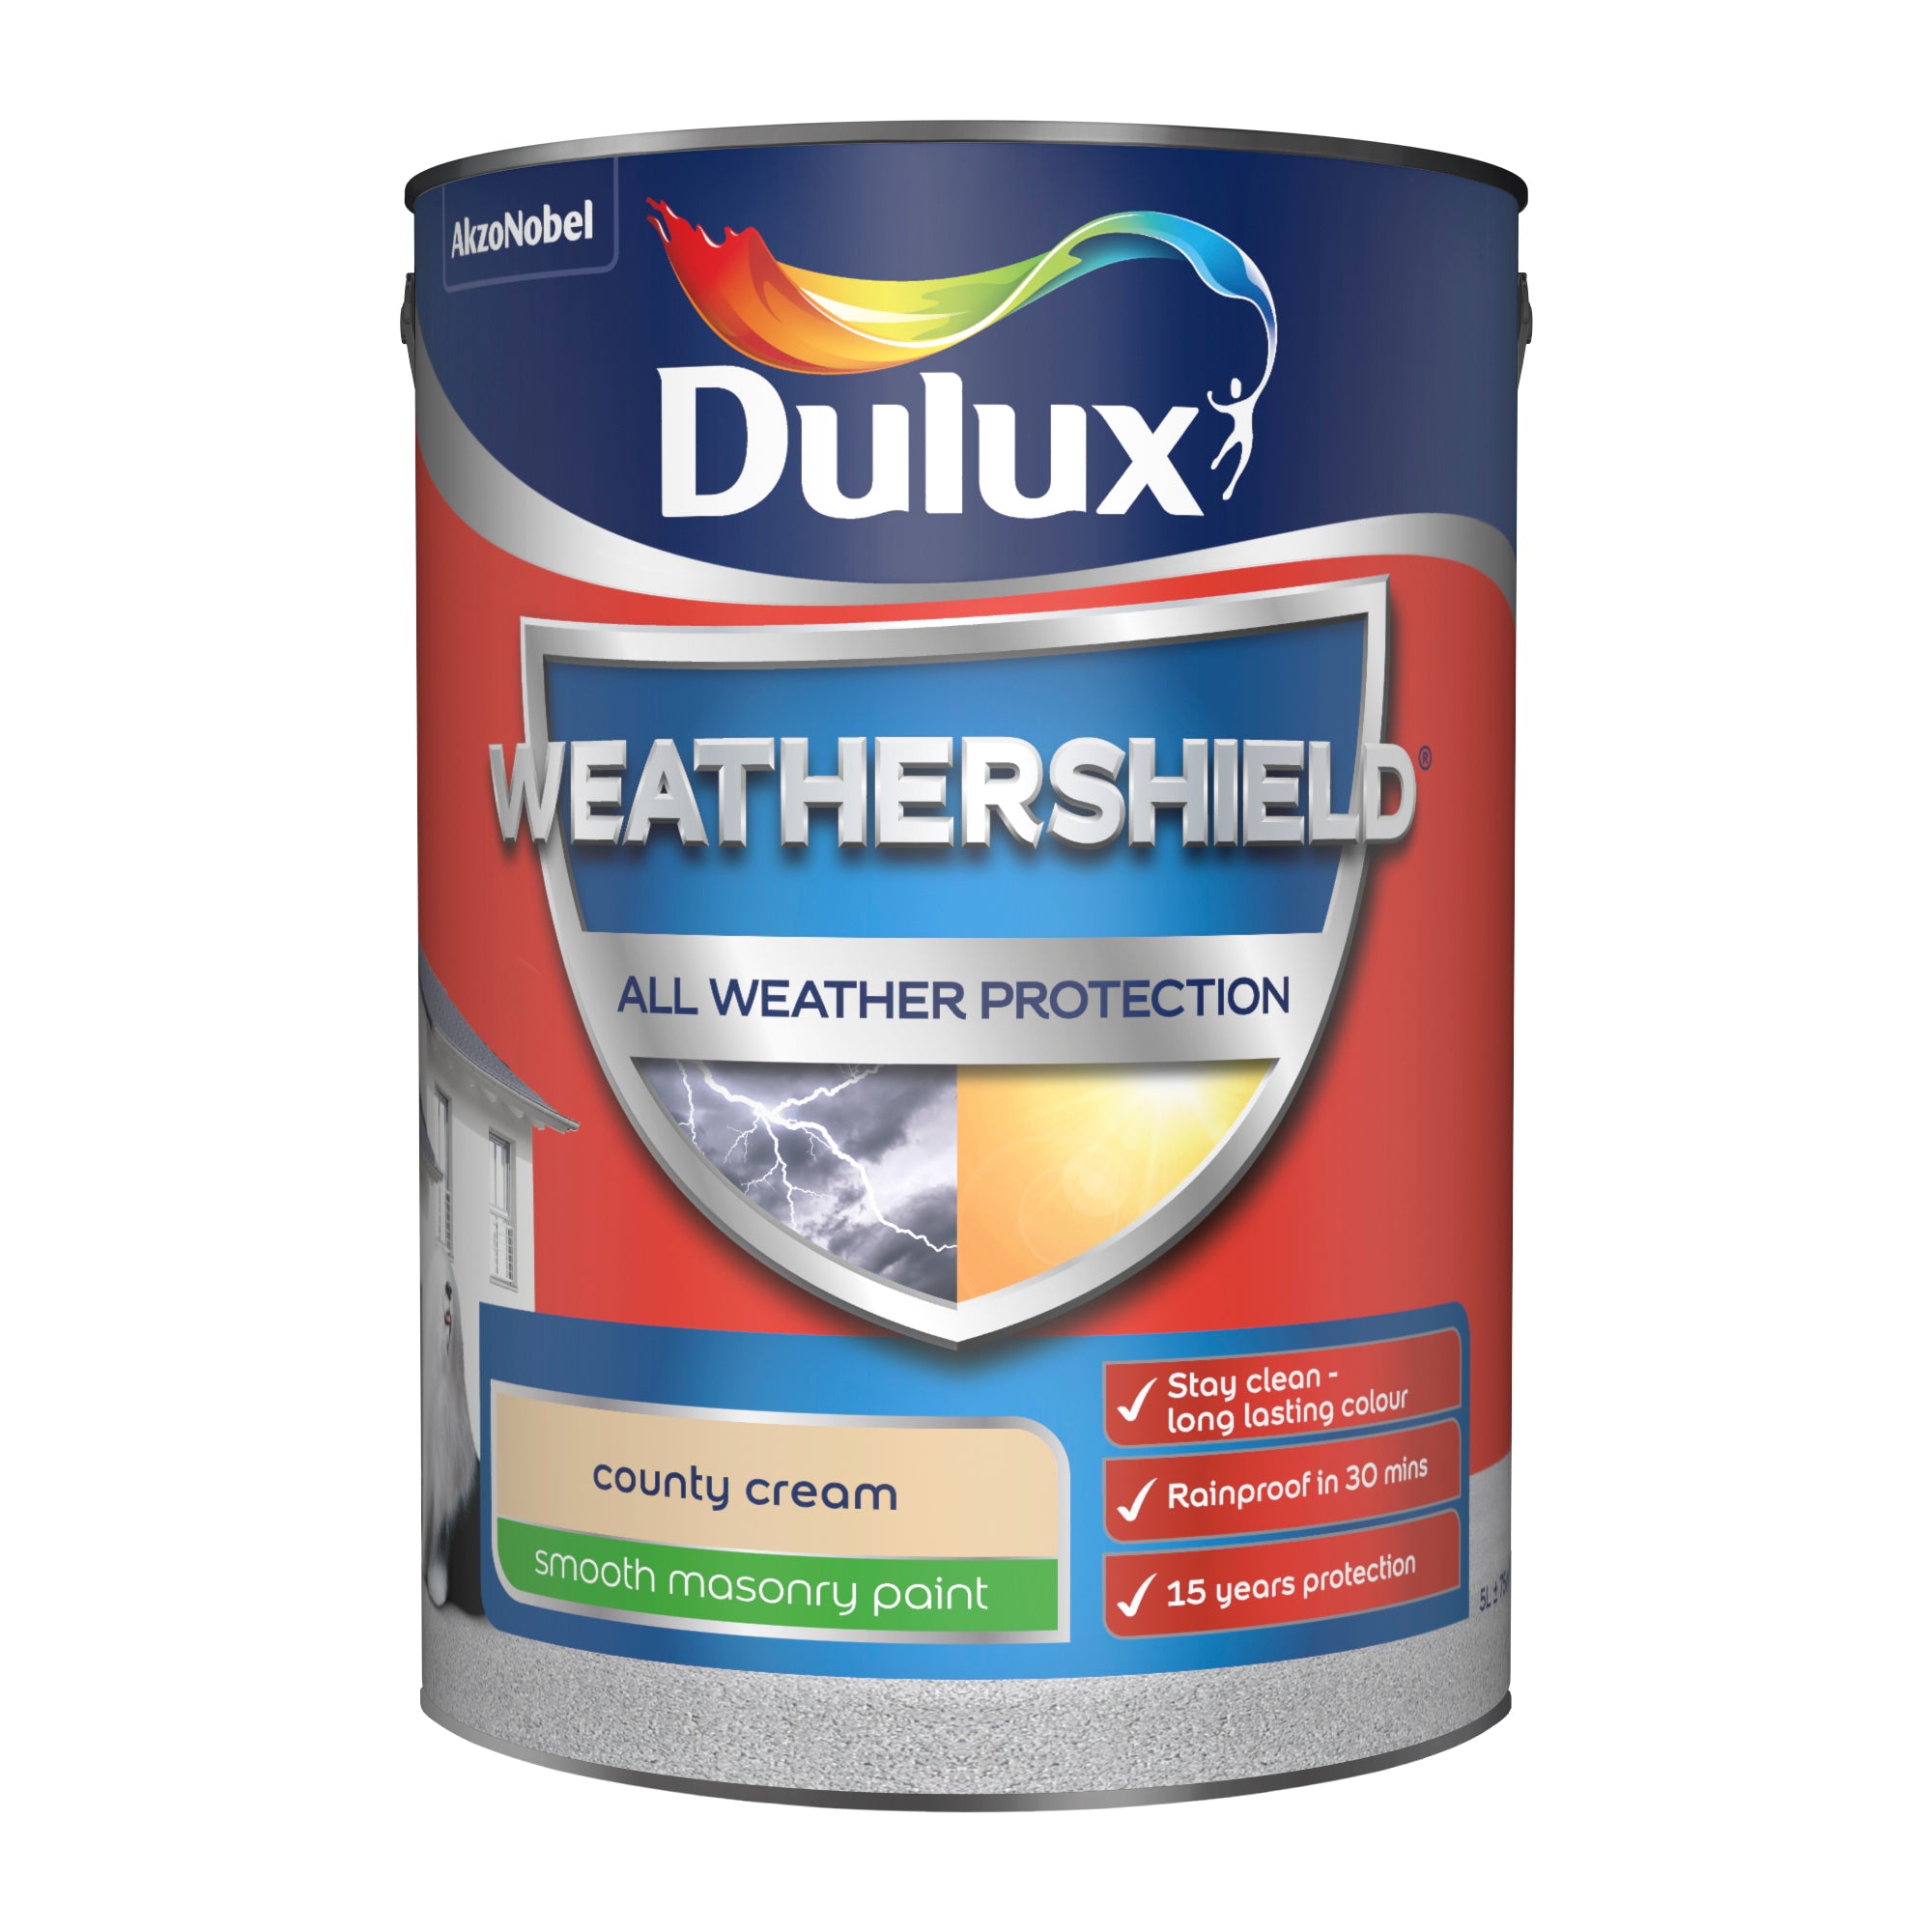 Dulux Weathershield All Weather Protection Smooth County Cream 5L